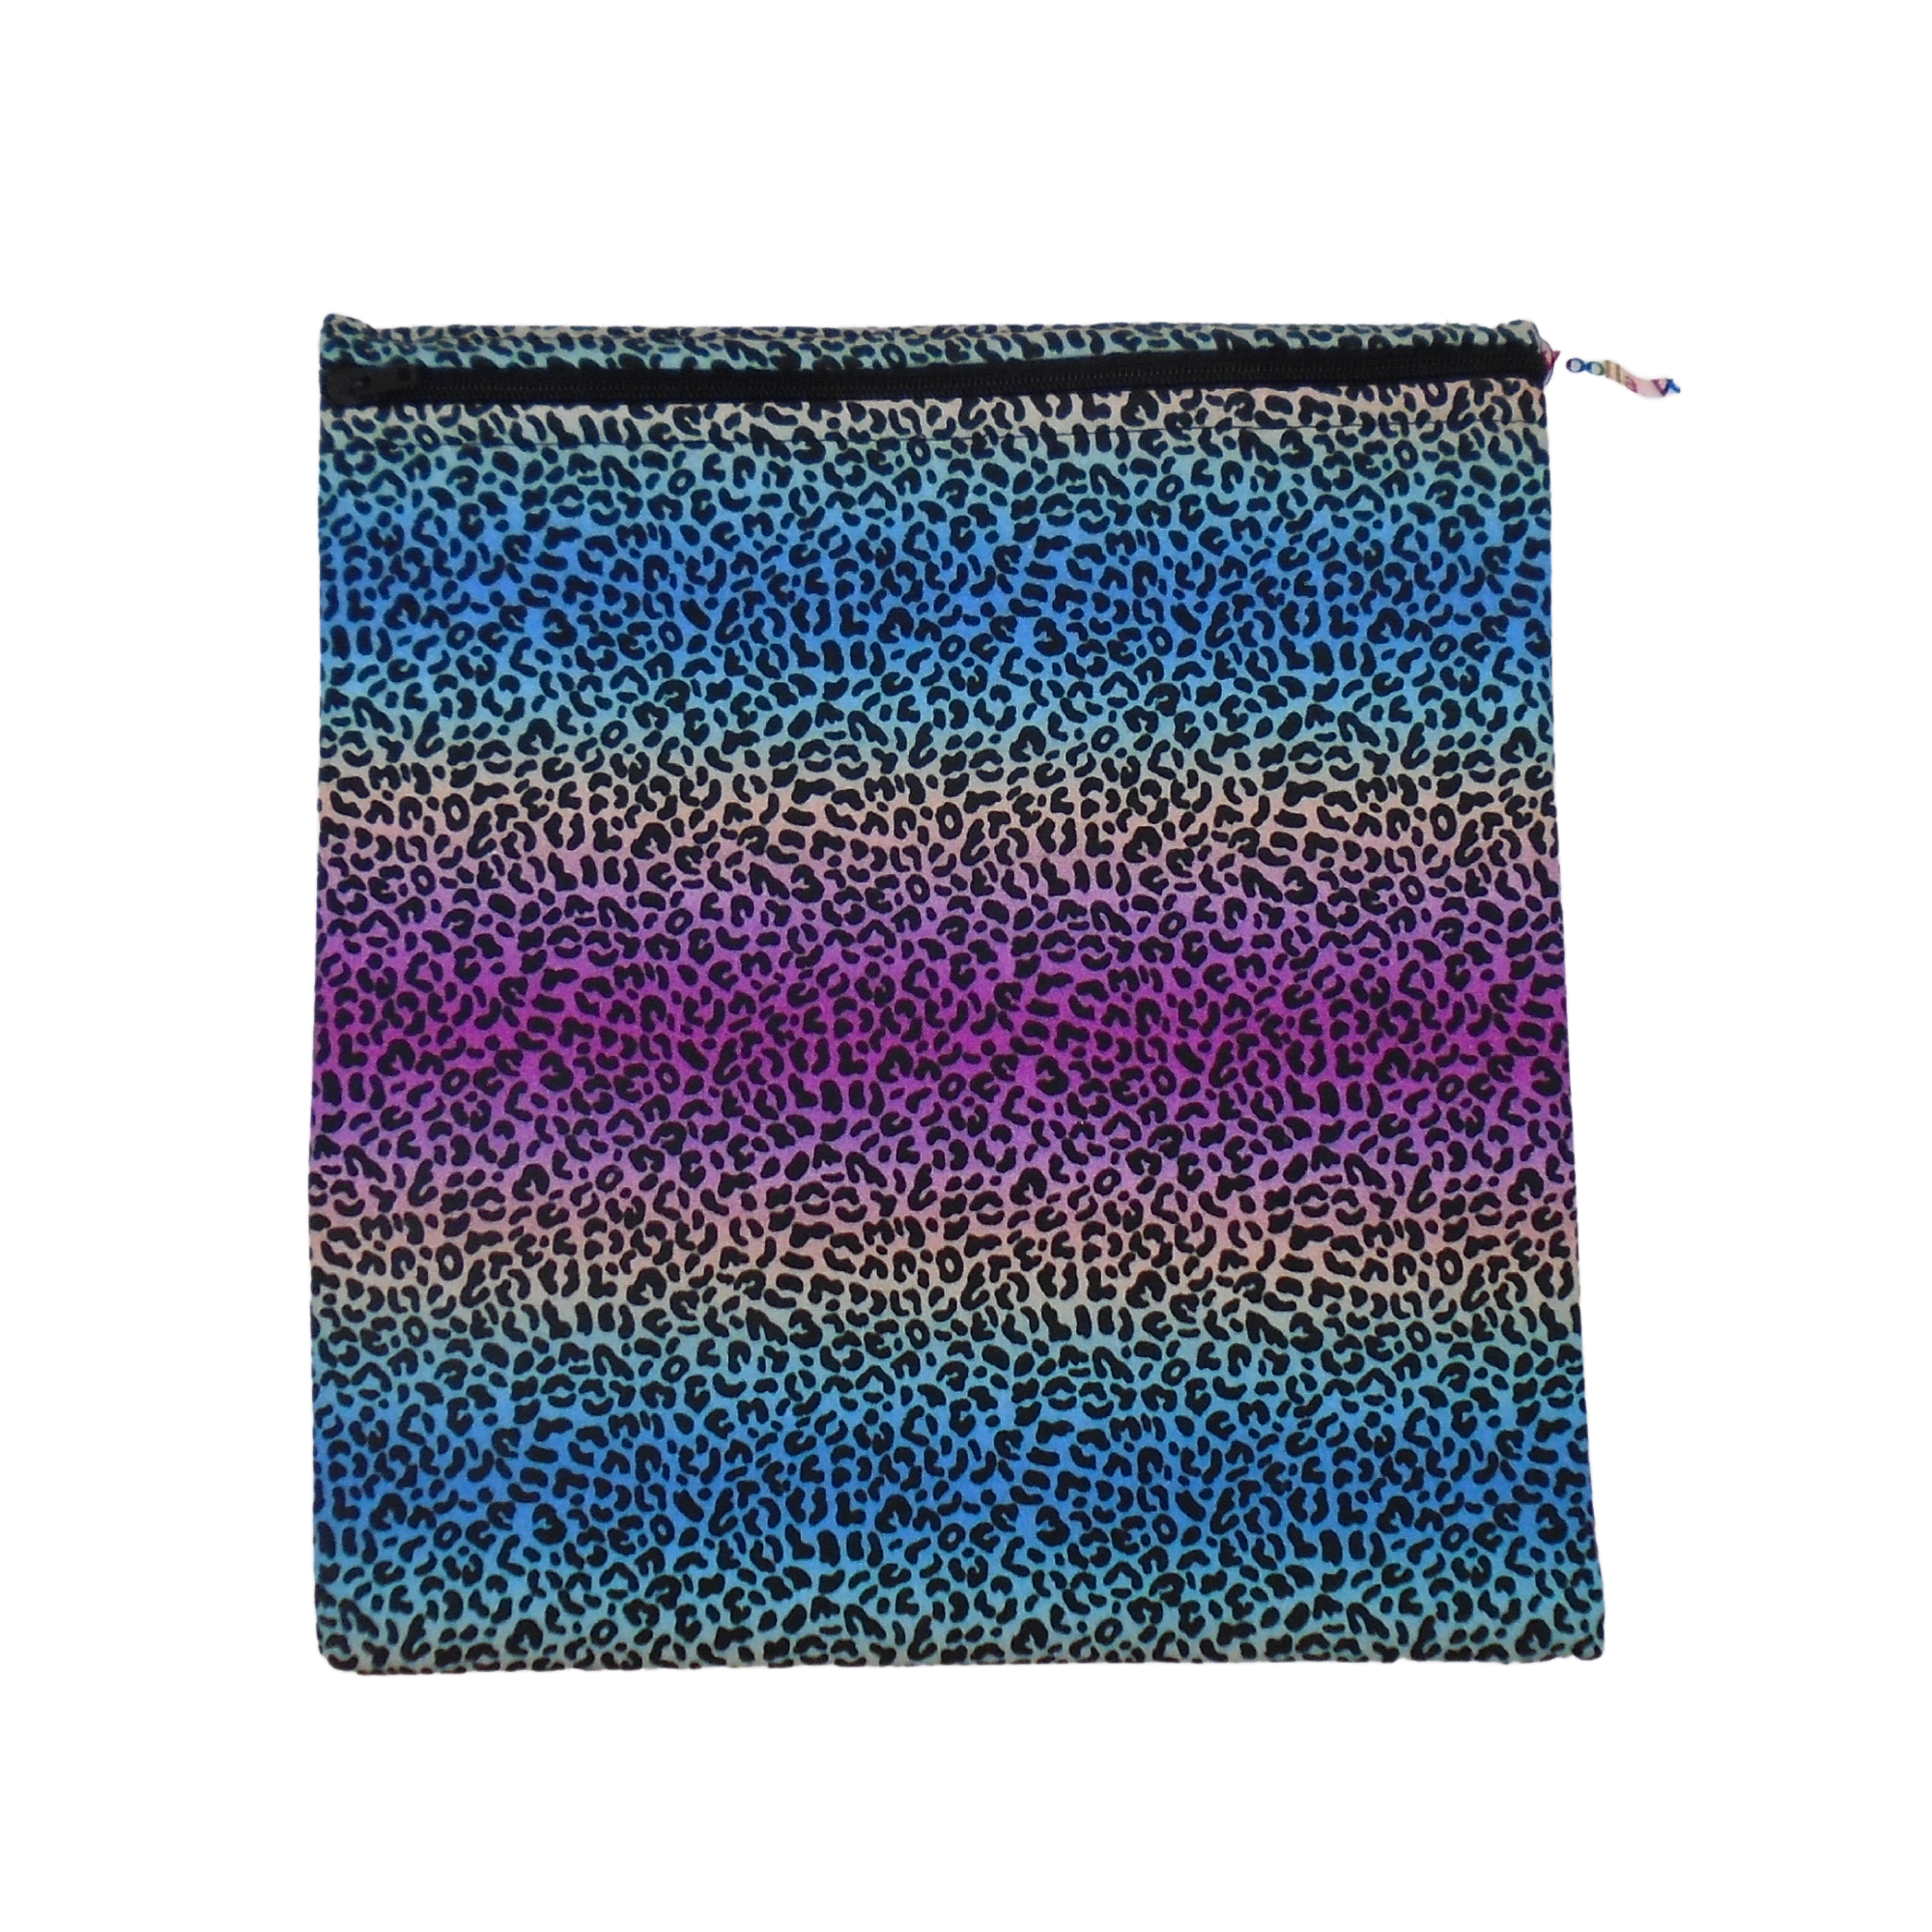 Rainbow Leopard Print - Large Poppins Pouch - Waterproof, Washable, Food Safe, Vegan, Lined Zip Bag